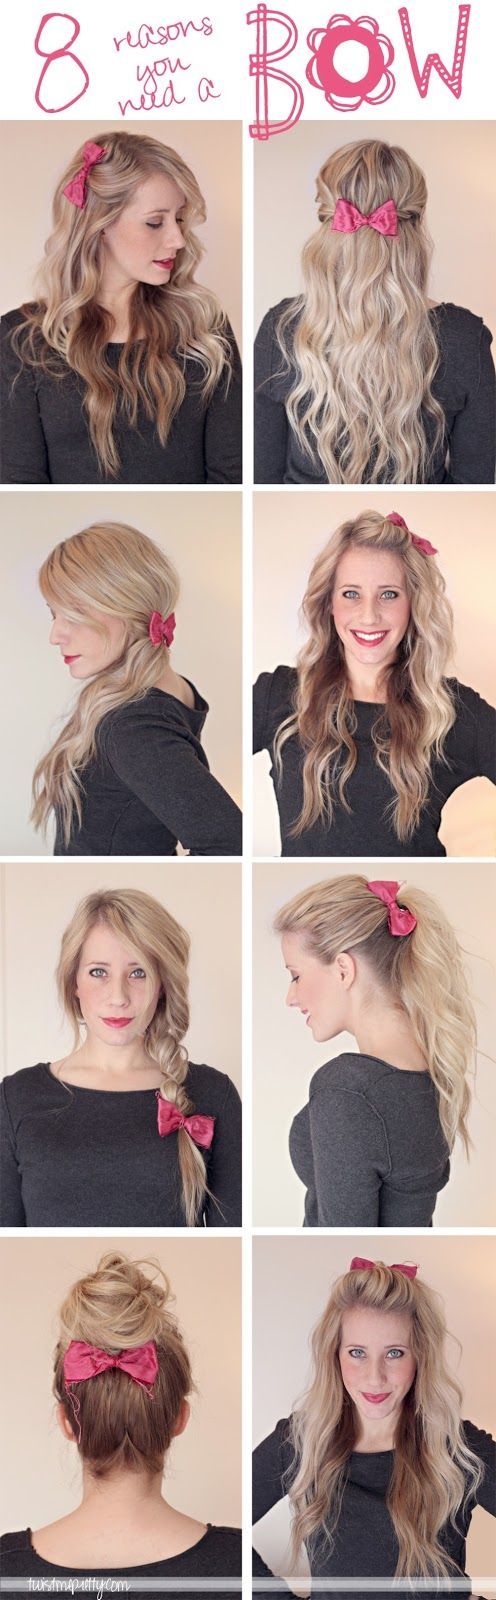 8 Ways to Use a Bow